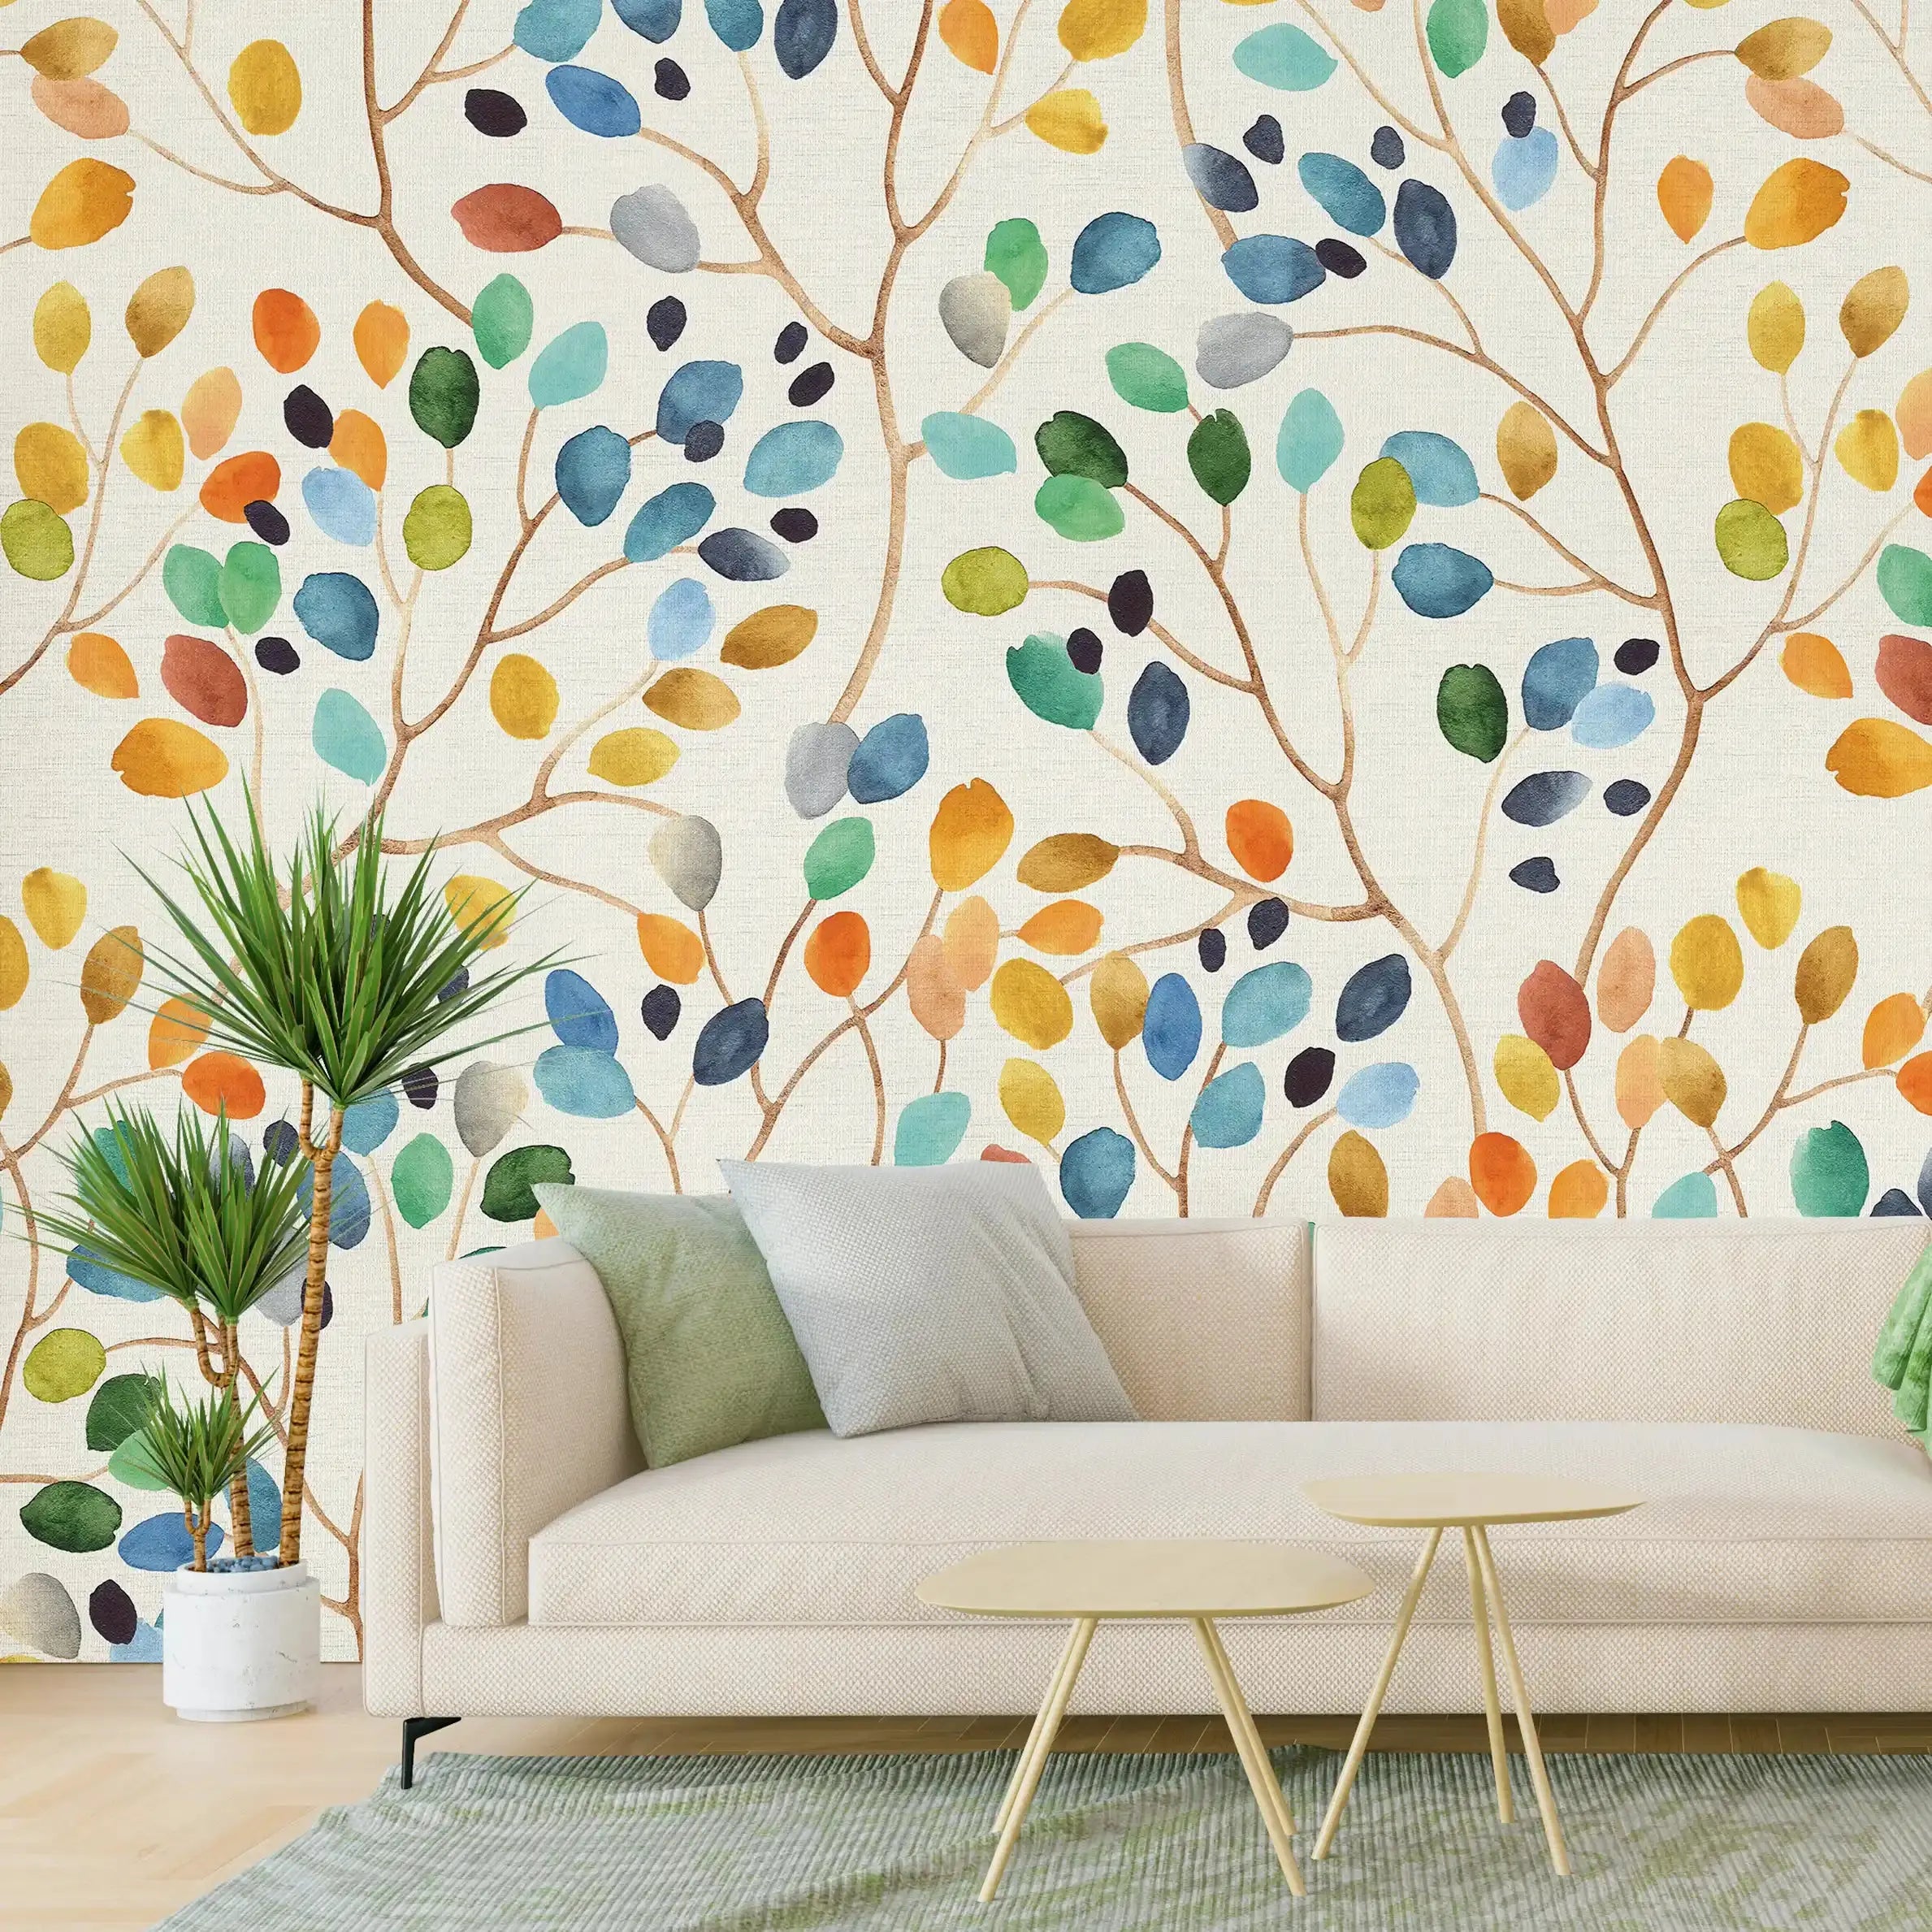 3063-A / Tropical Floral Peel and Stick Wallpaper - Colorful Woodland Branch, Decorative for Accent Wall, Removable and Easy to Install - Artevella